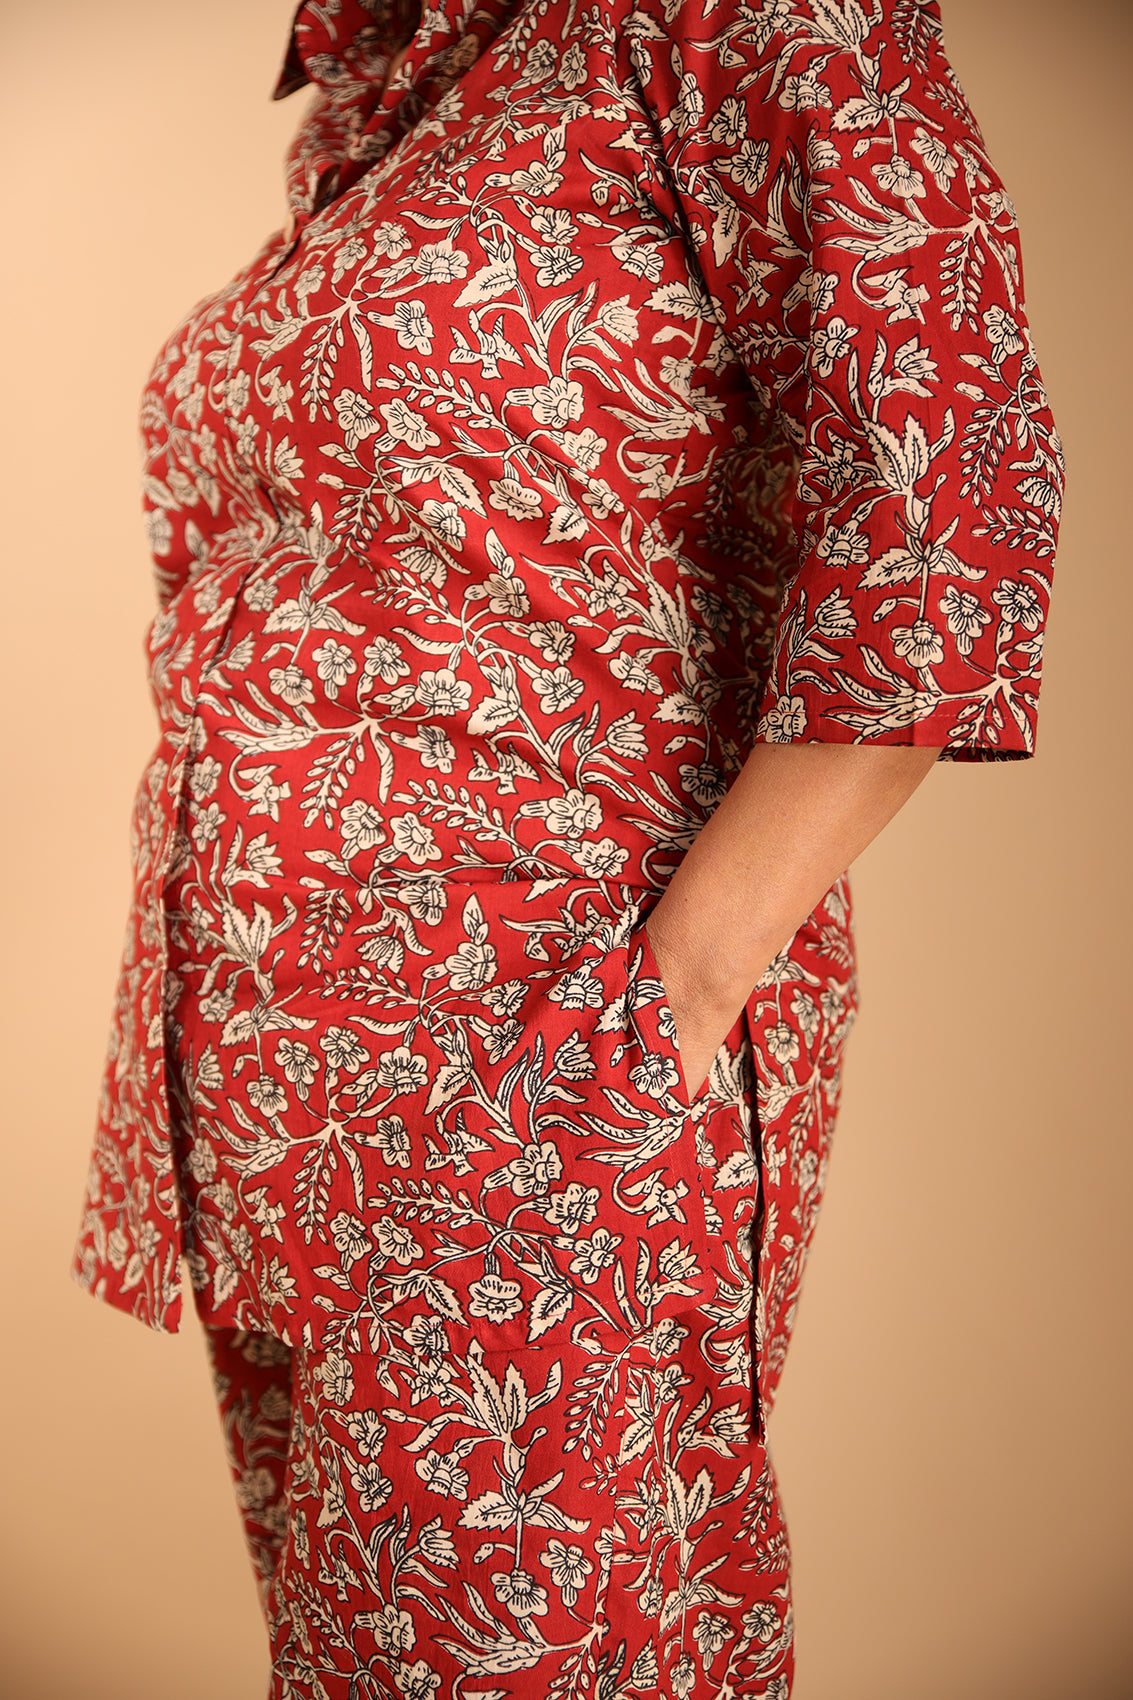 Red-Collared Lounge Wear Set